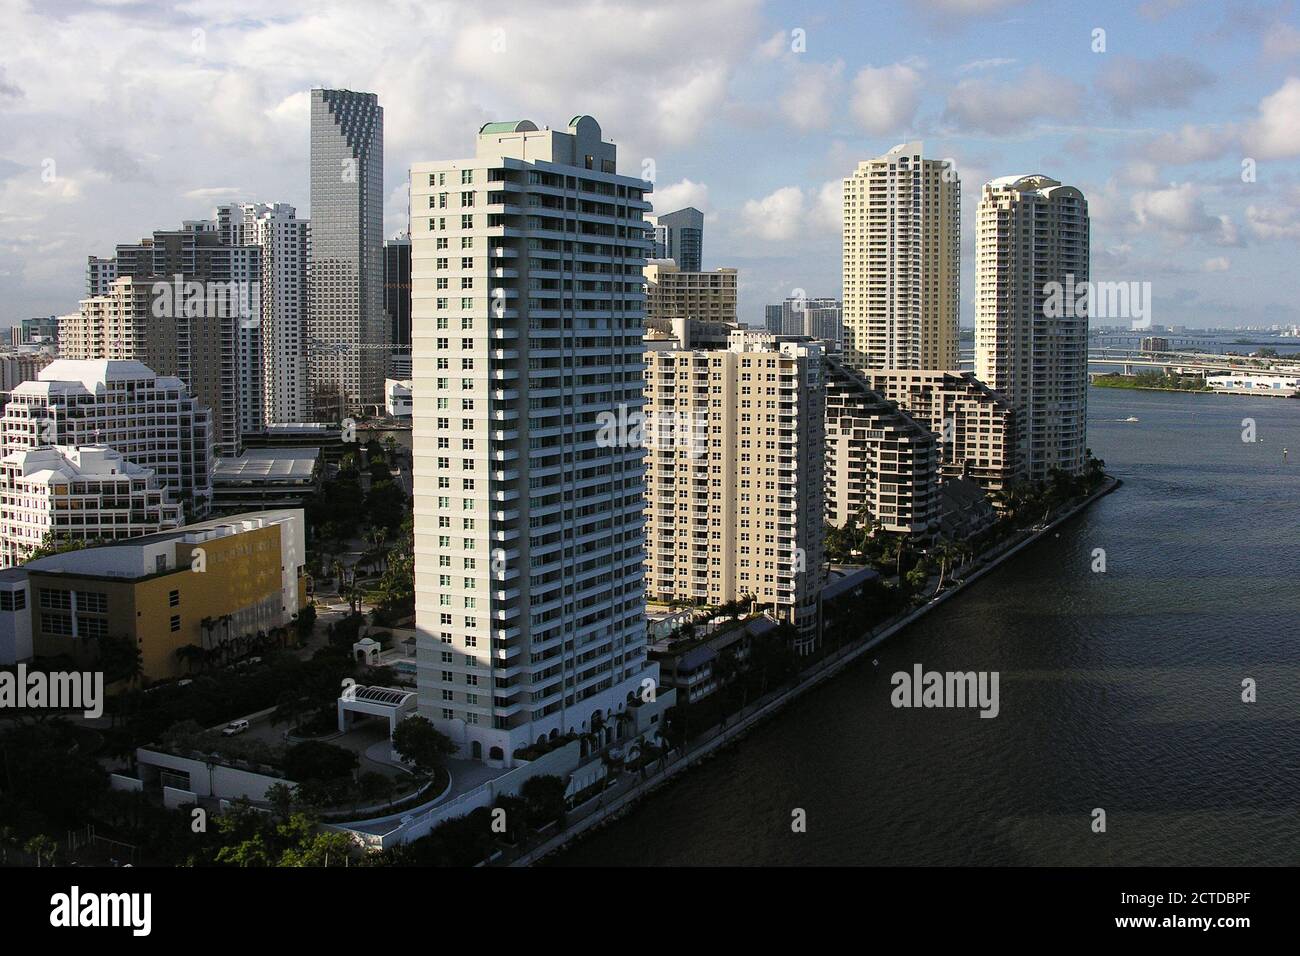 Miami, Florida, USA - September 2005:  Archival view of waterfront condo and apartment towers in downtown Miami. Stock Photo